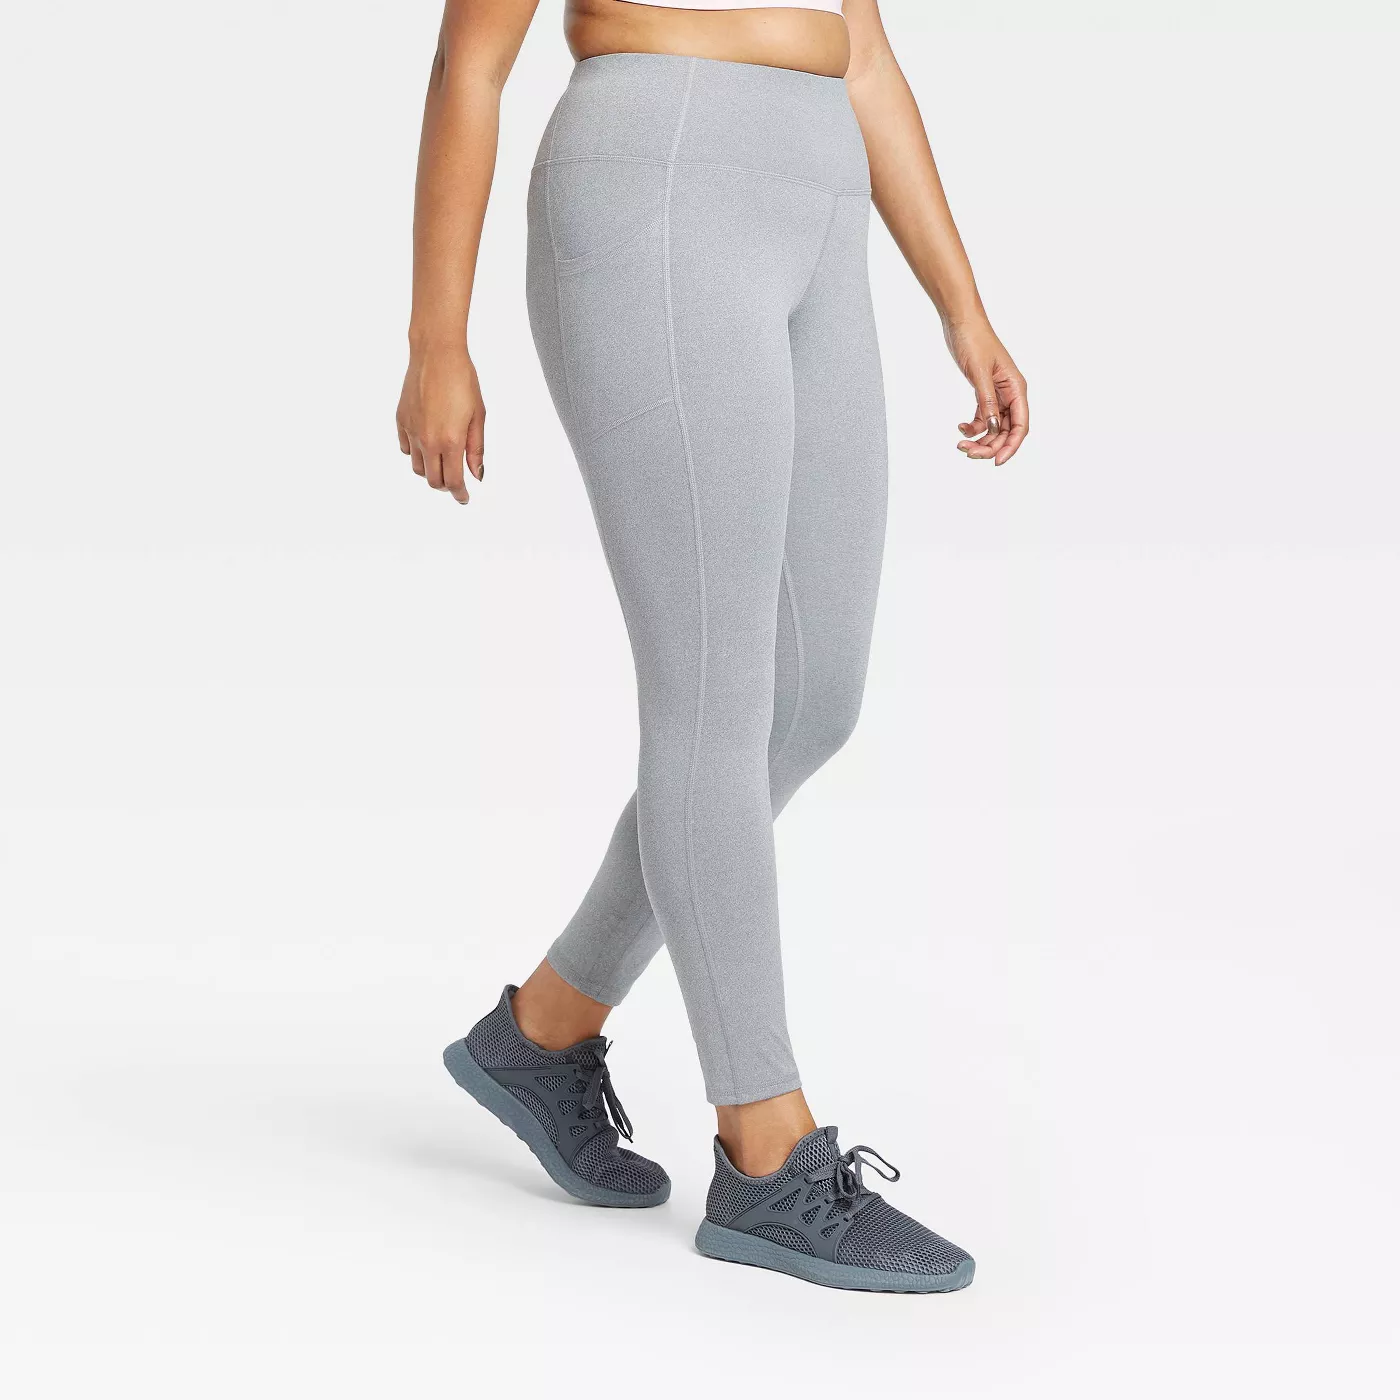 Target Announces the Launch of All in Motion, Its Own Size-Inclusive  Activewear Brand